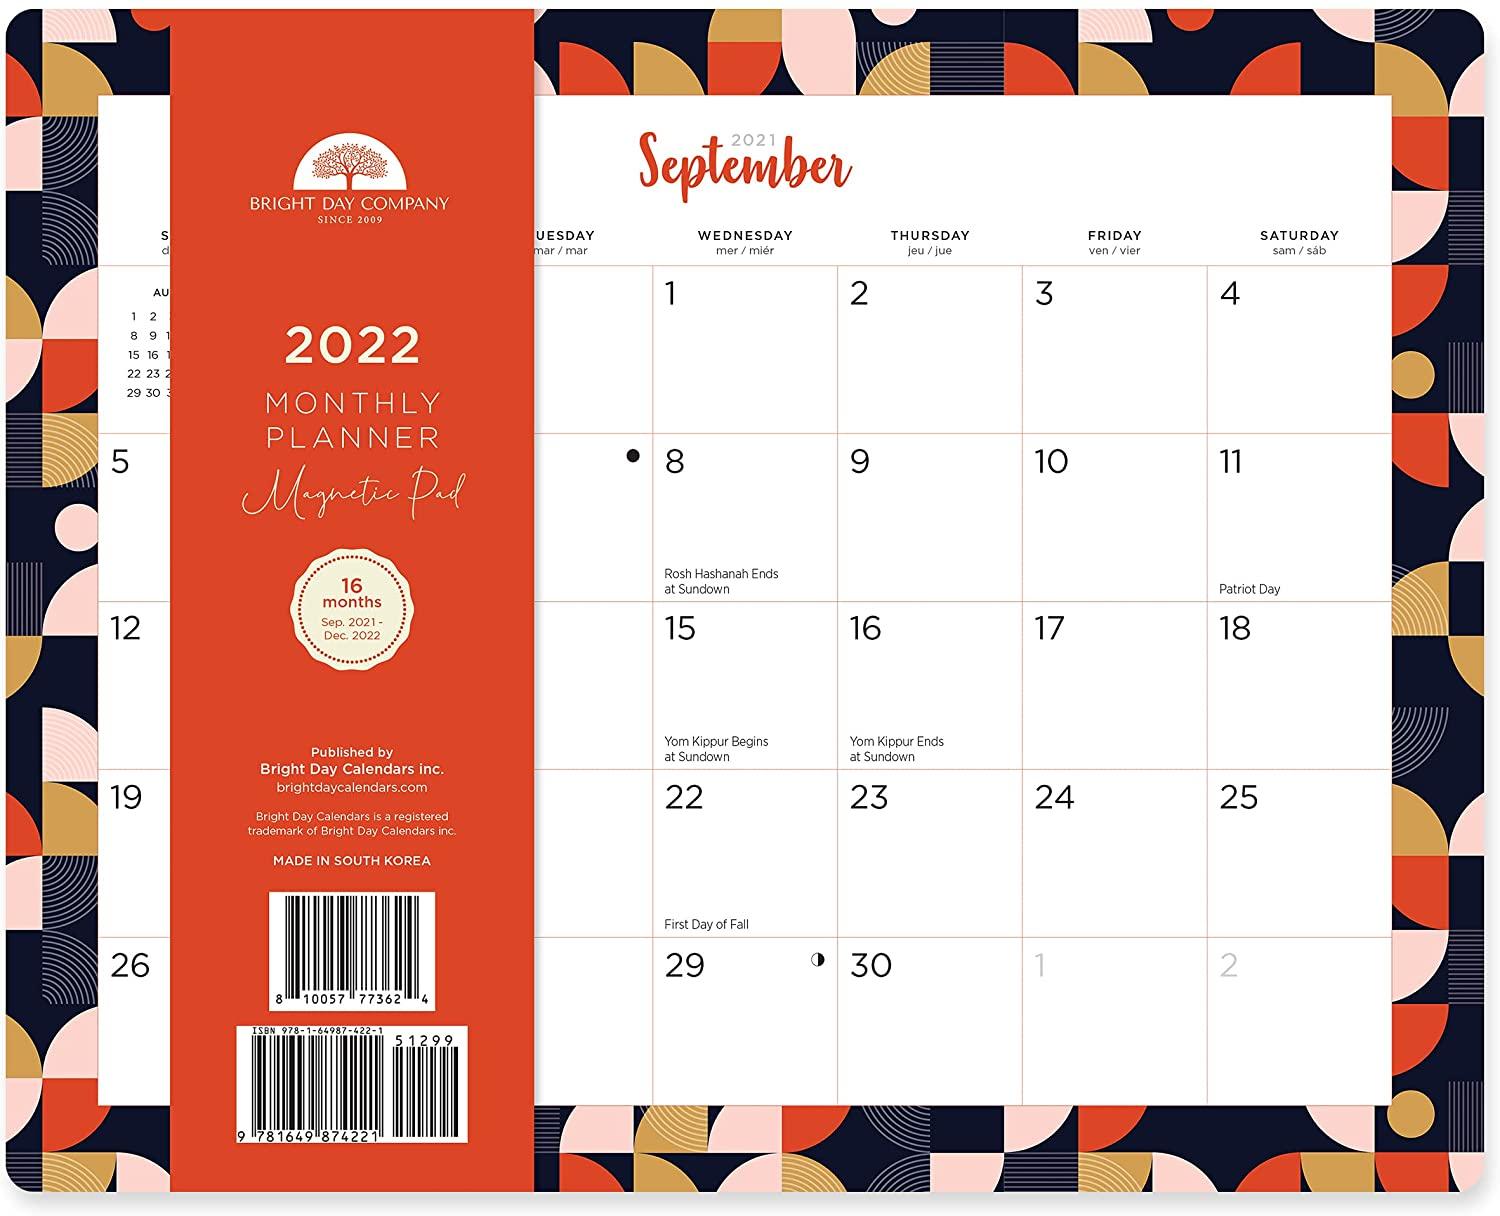 2022 Magnetic Refrigerator Wall Calendar Pad for $9.50